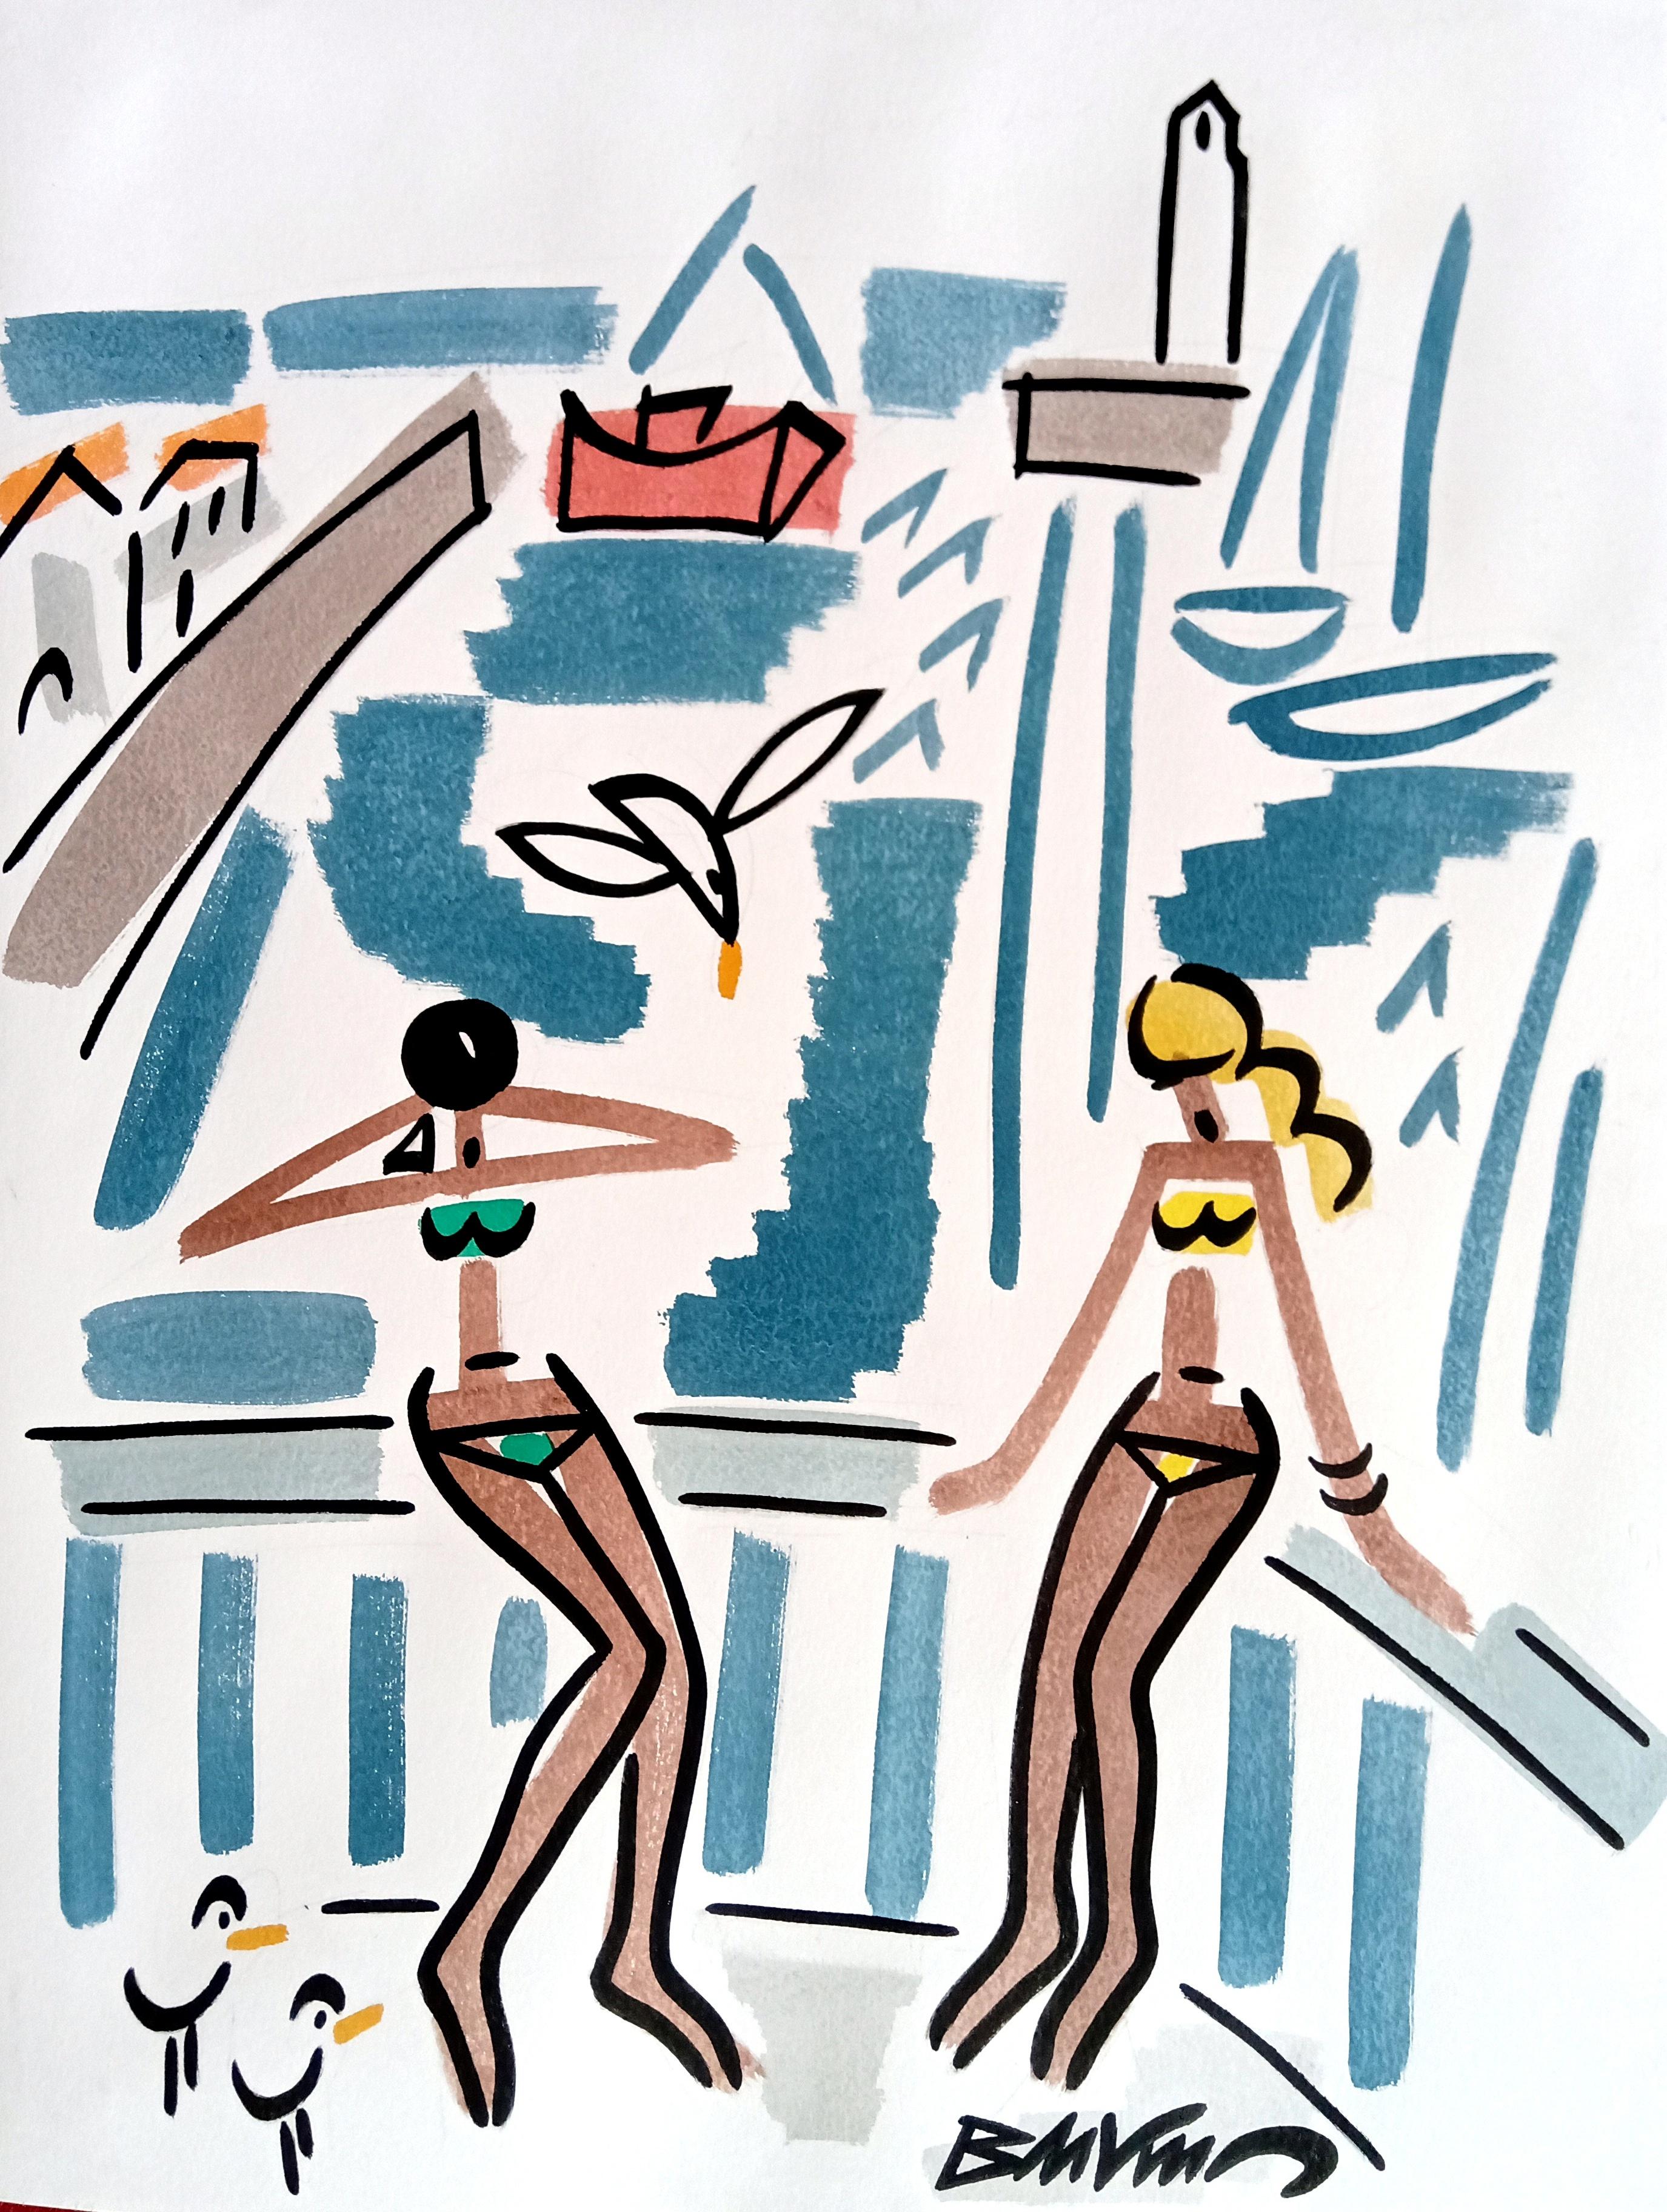 figurative drawing "Bathers in Cibourne" watercolors and indian ink on paper - Art by Bertrand de Vismes